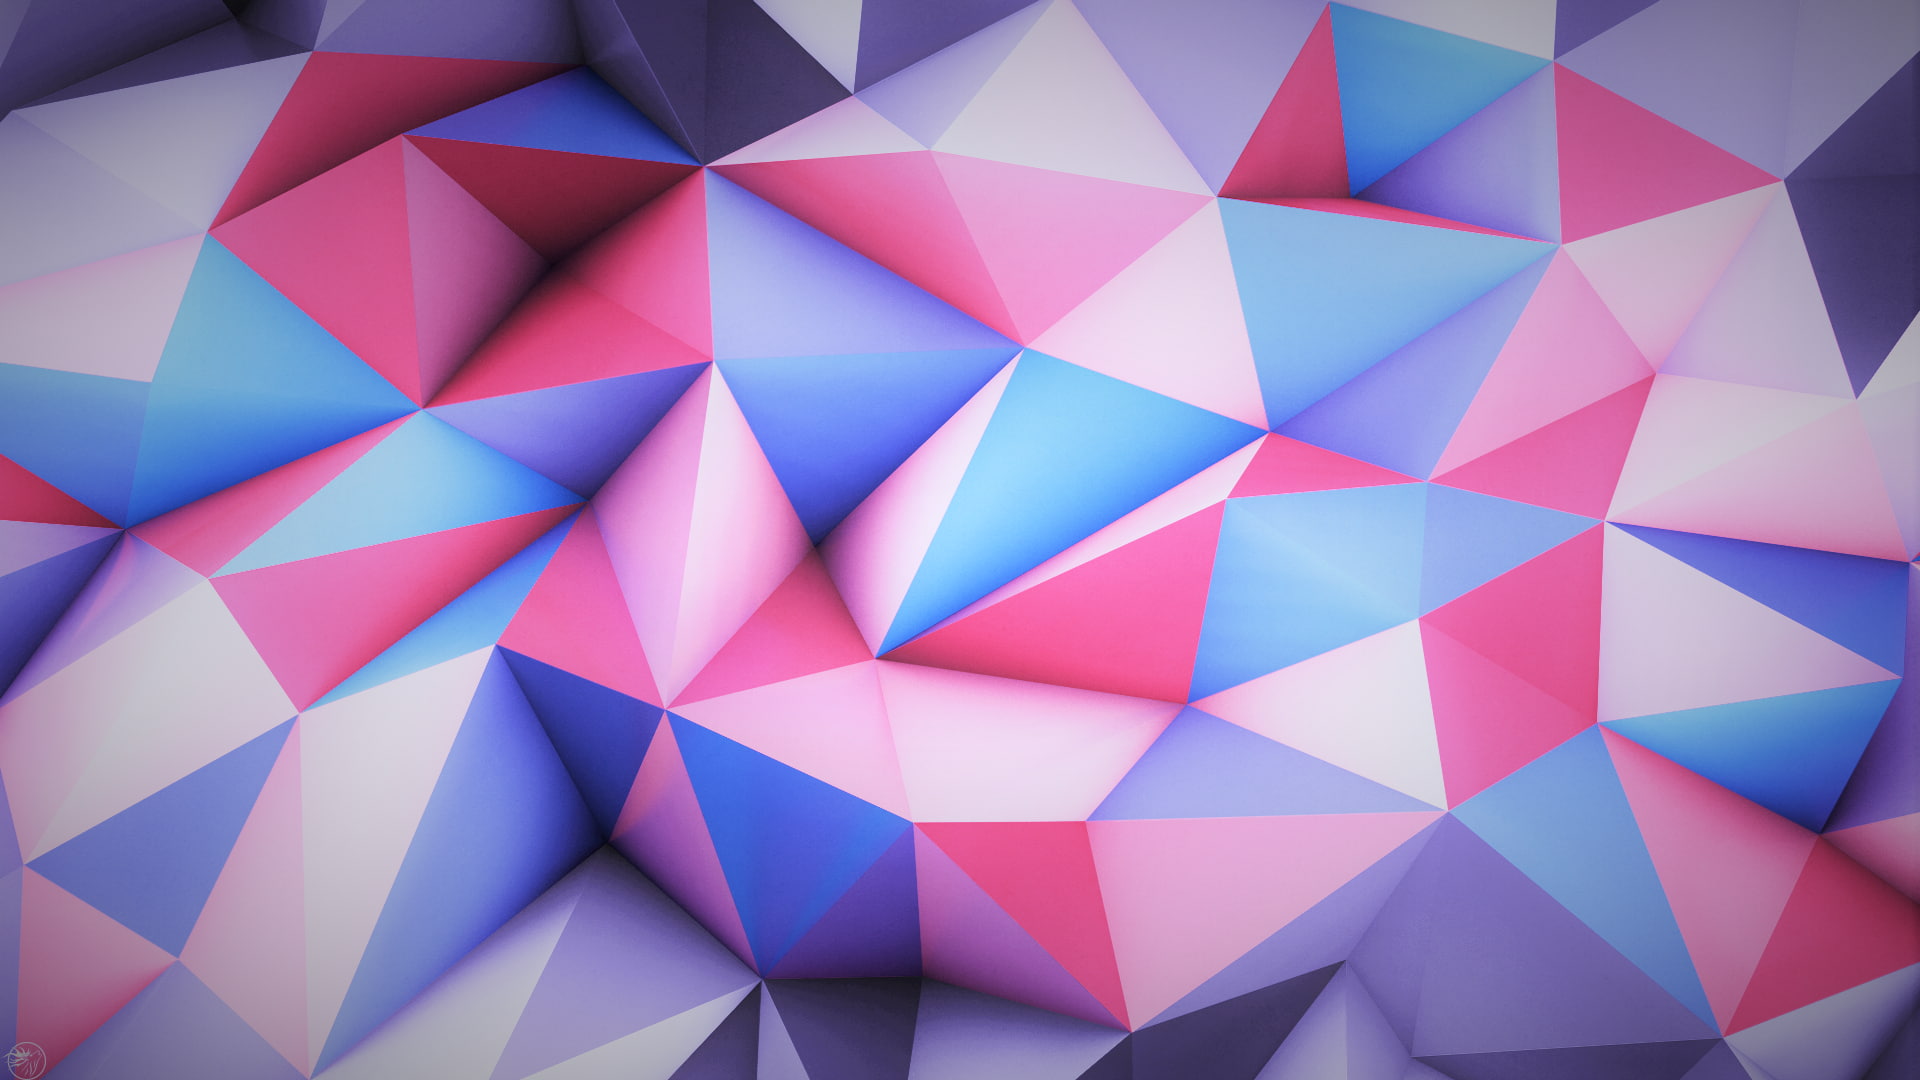 abstract, 3D, pink, blue, bright, colorful, backgrounds, shape